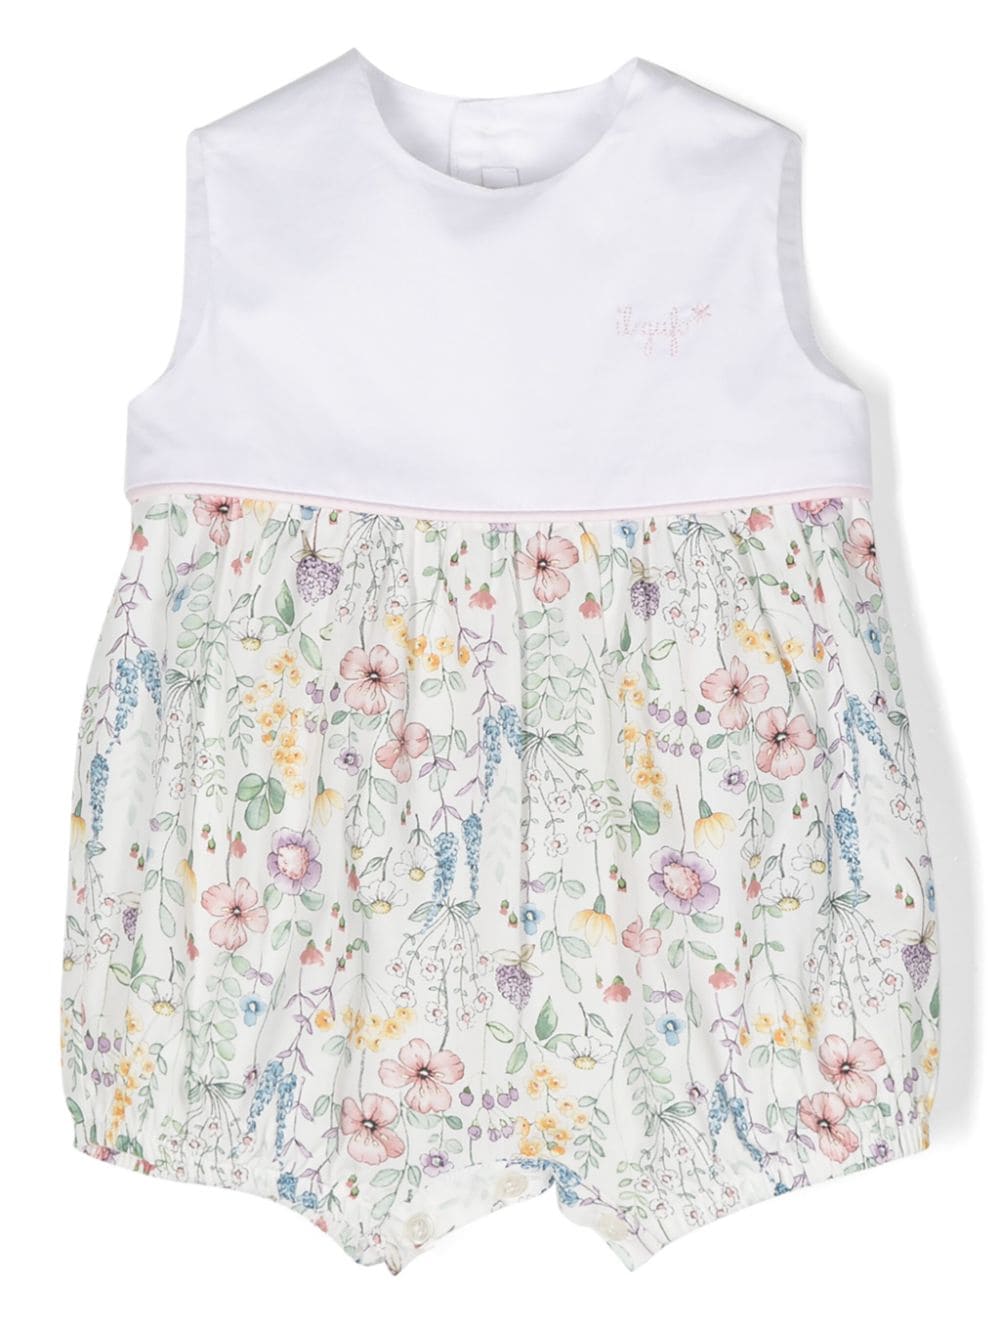 White romper for baby girls with print